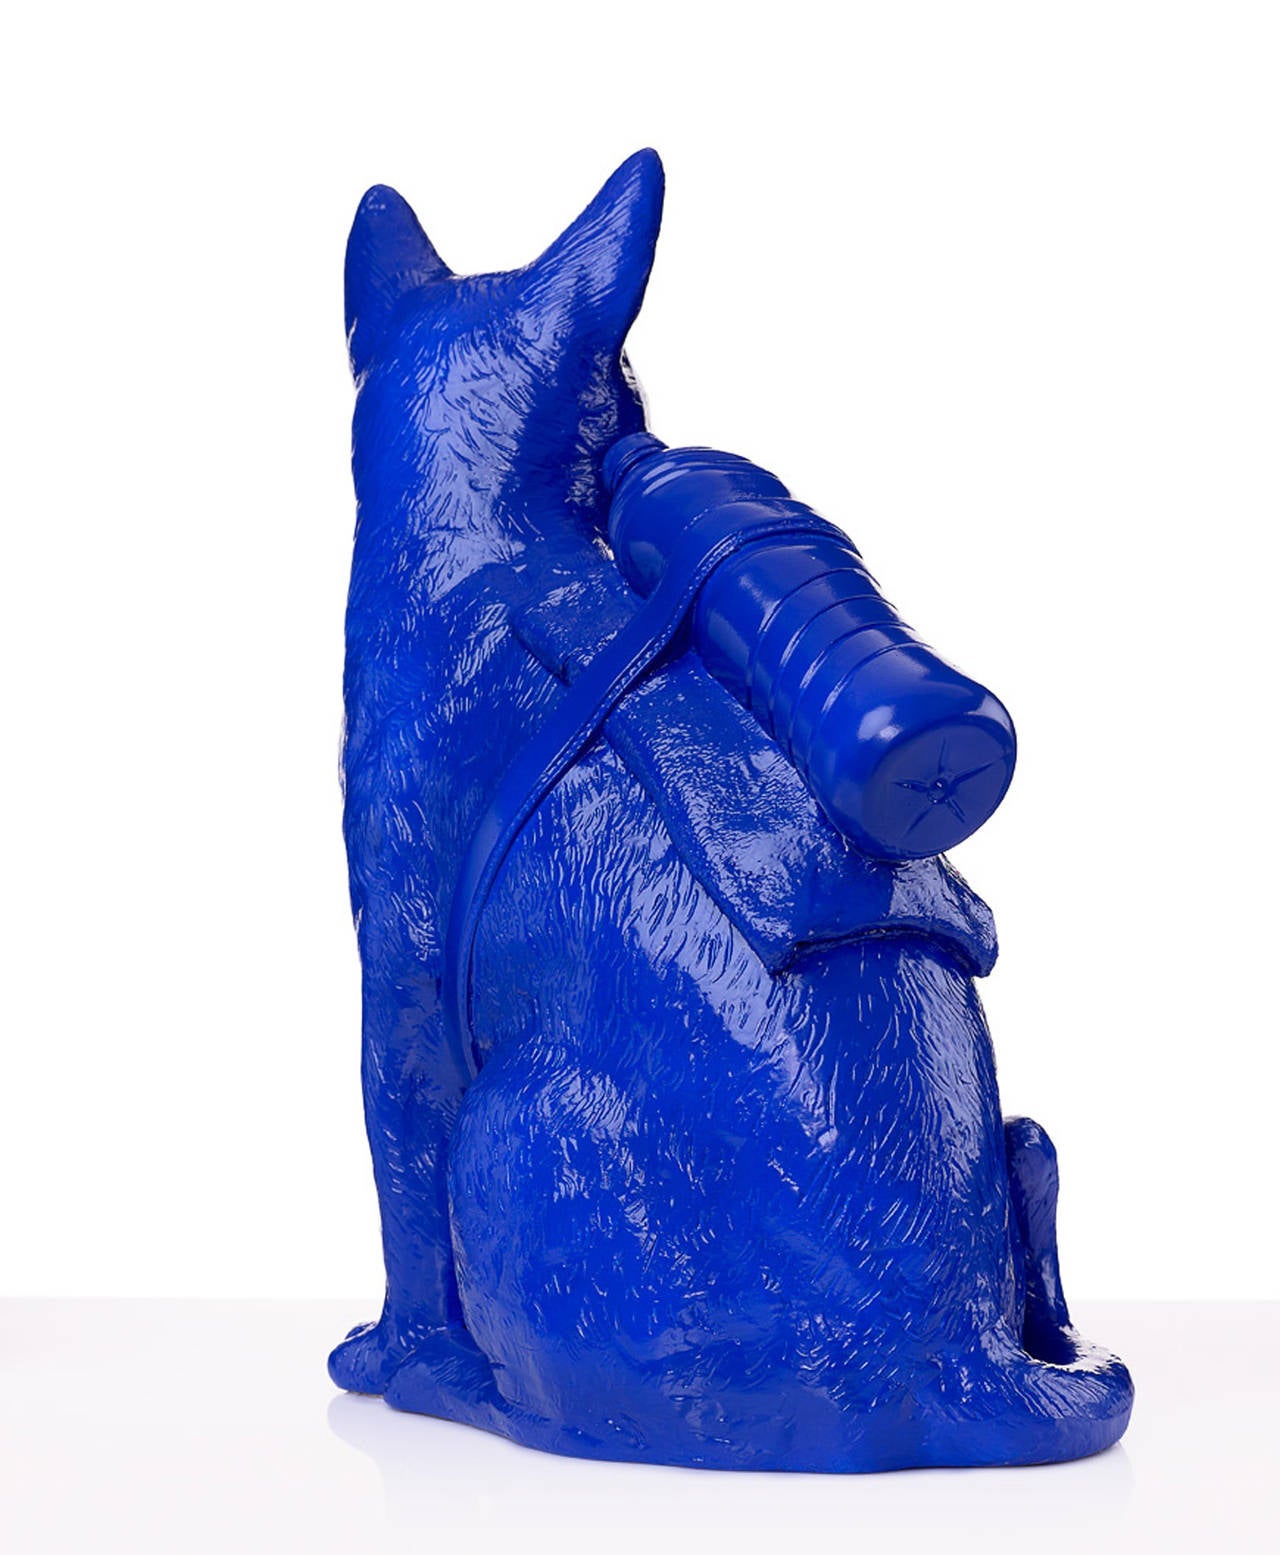 Cloned Cat with pet bottle. - Pop Art Sculpture by William Sweetlove